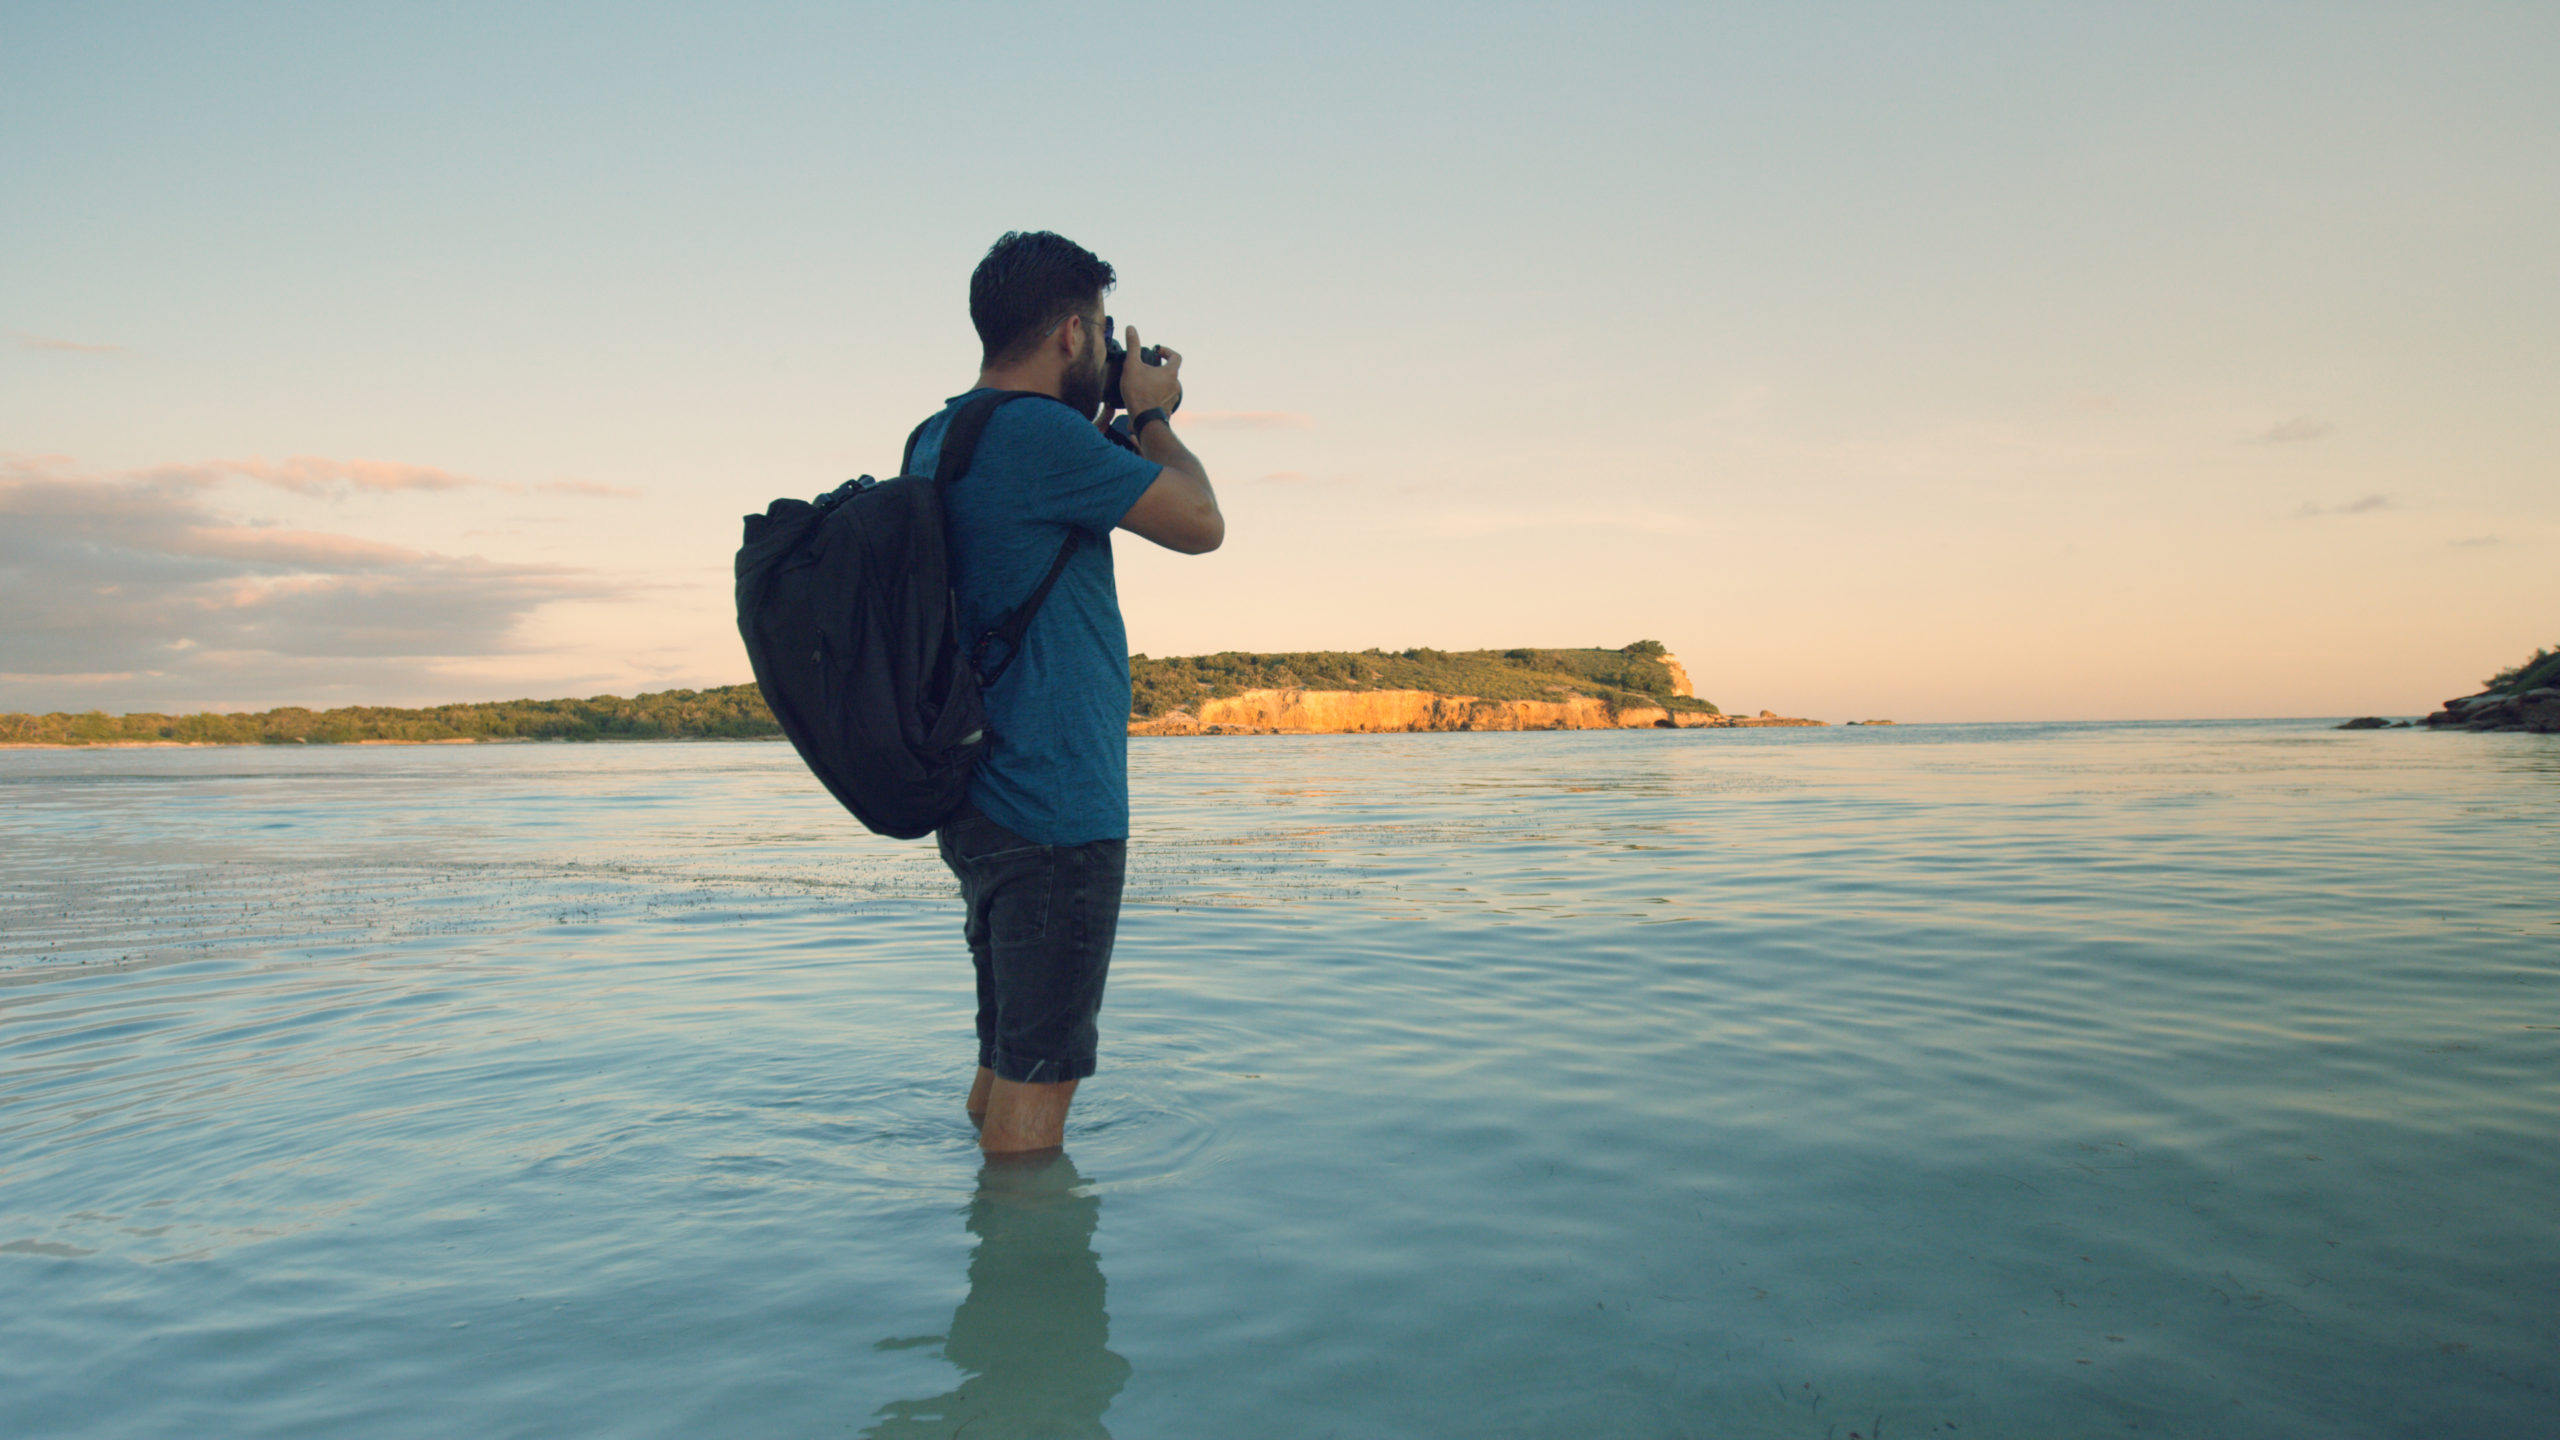 Black Mile Travel Bag Man talking a picture of an island standing in the water wearing a backpack